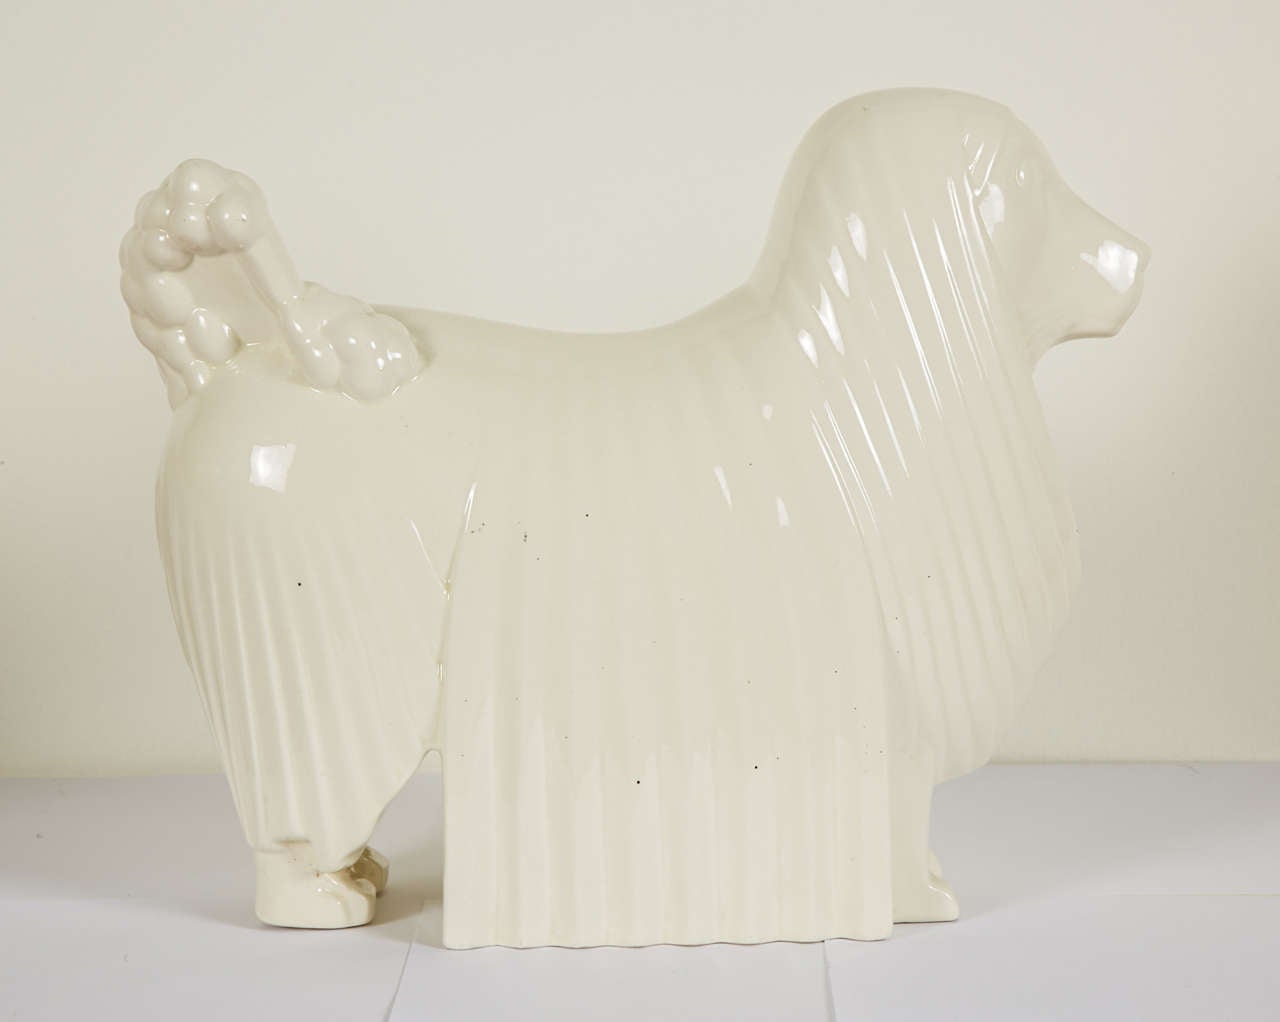 French Ceramic Poodle by Adnet, France, Art Deco, circa 1930